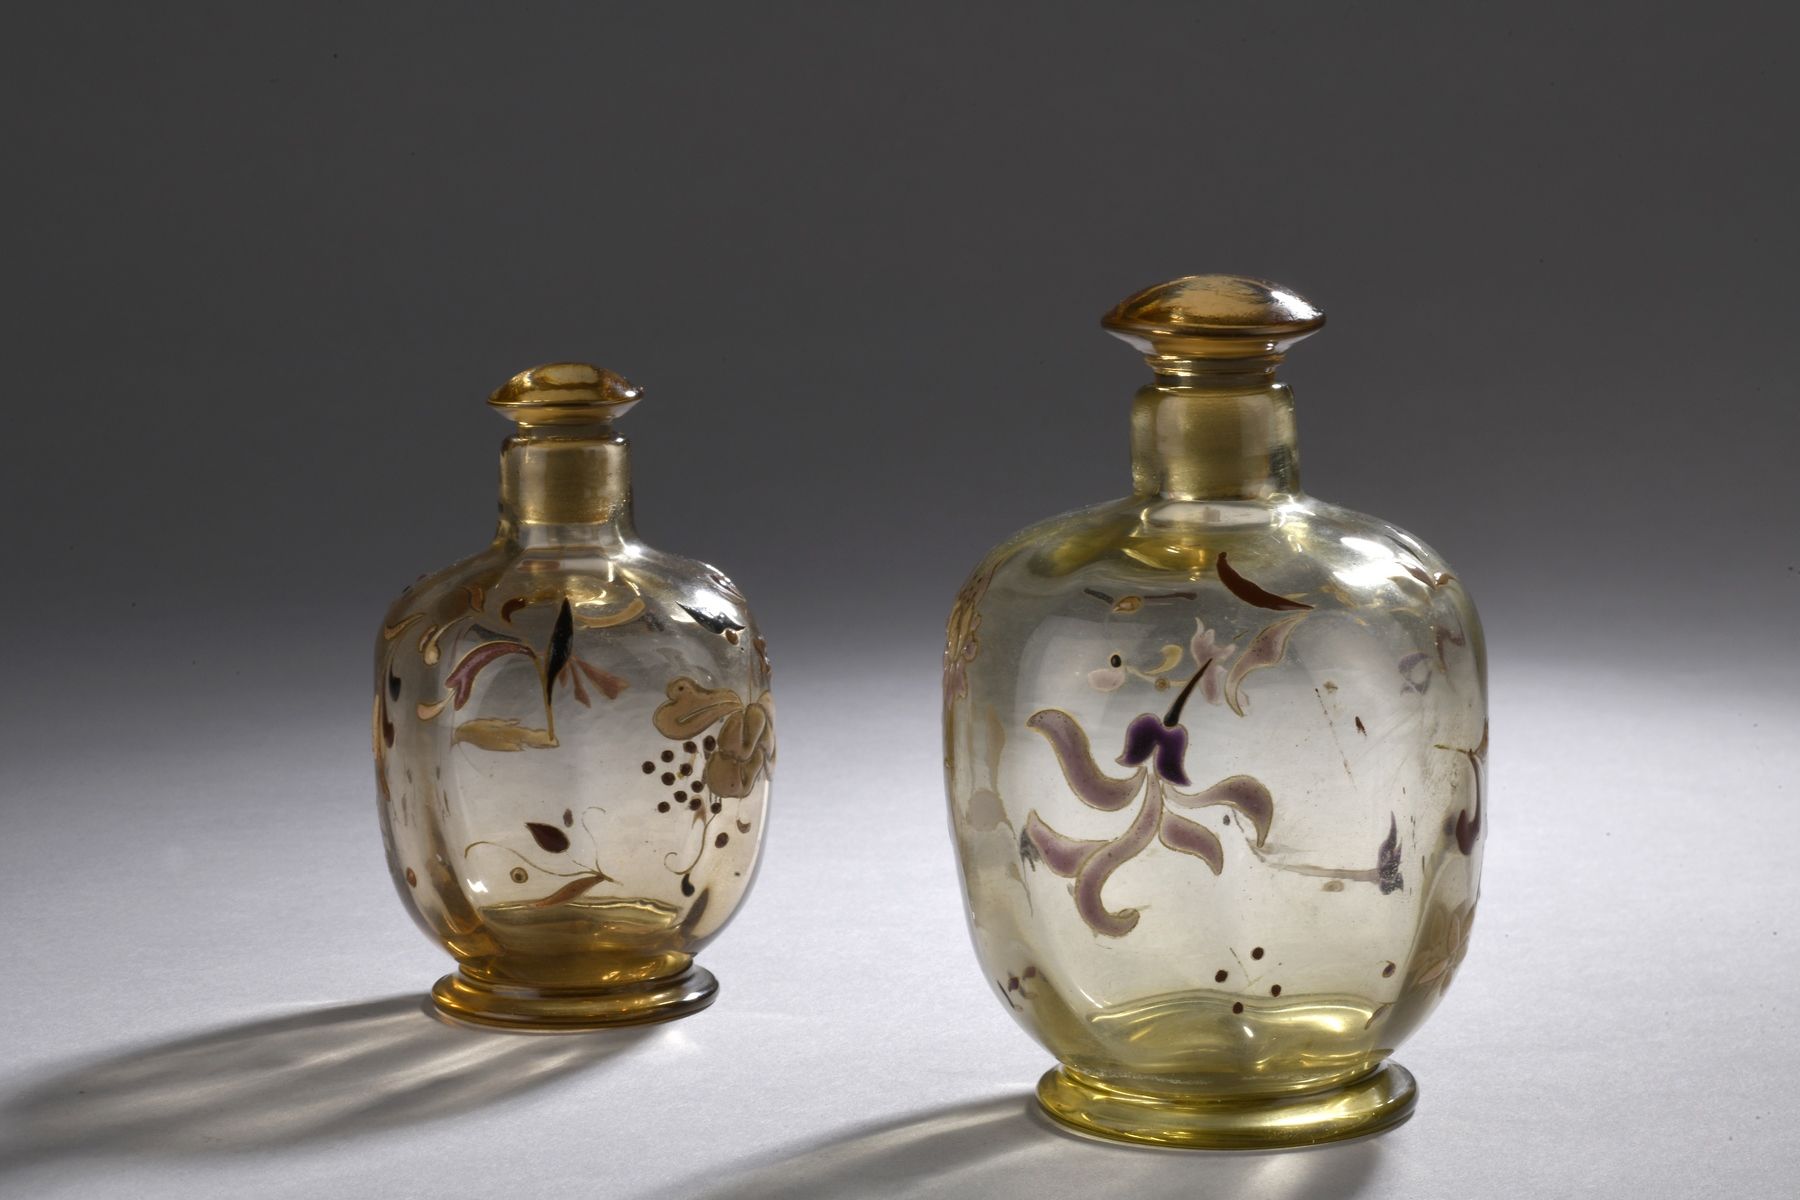 Null Emile GALLE (1846 - 1904)
Two flasks with ovoid body, fully grooved on a ci&hellip;